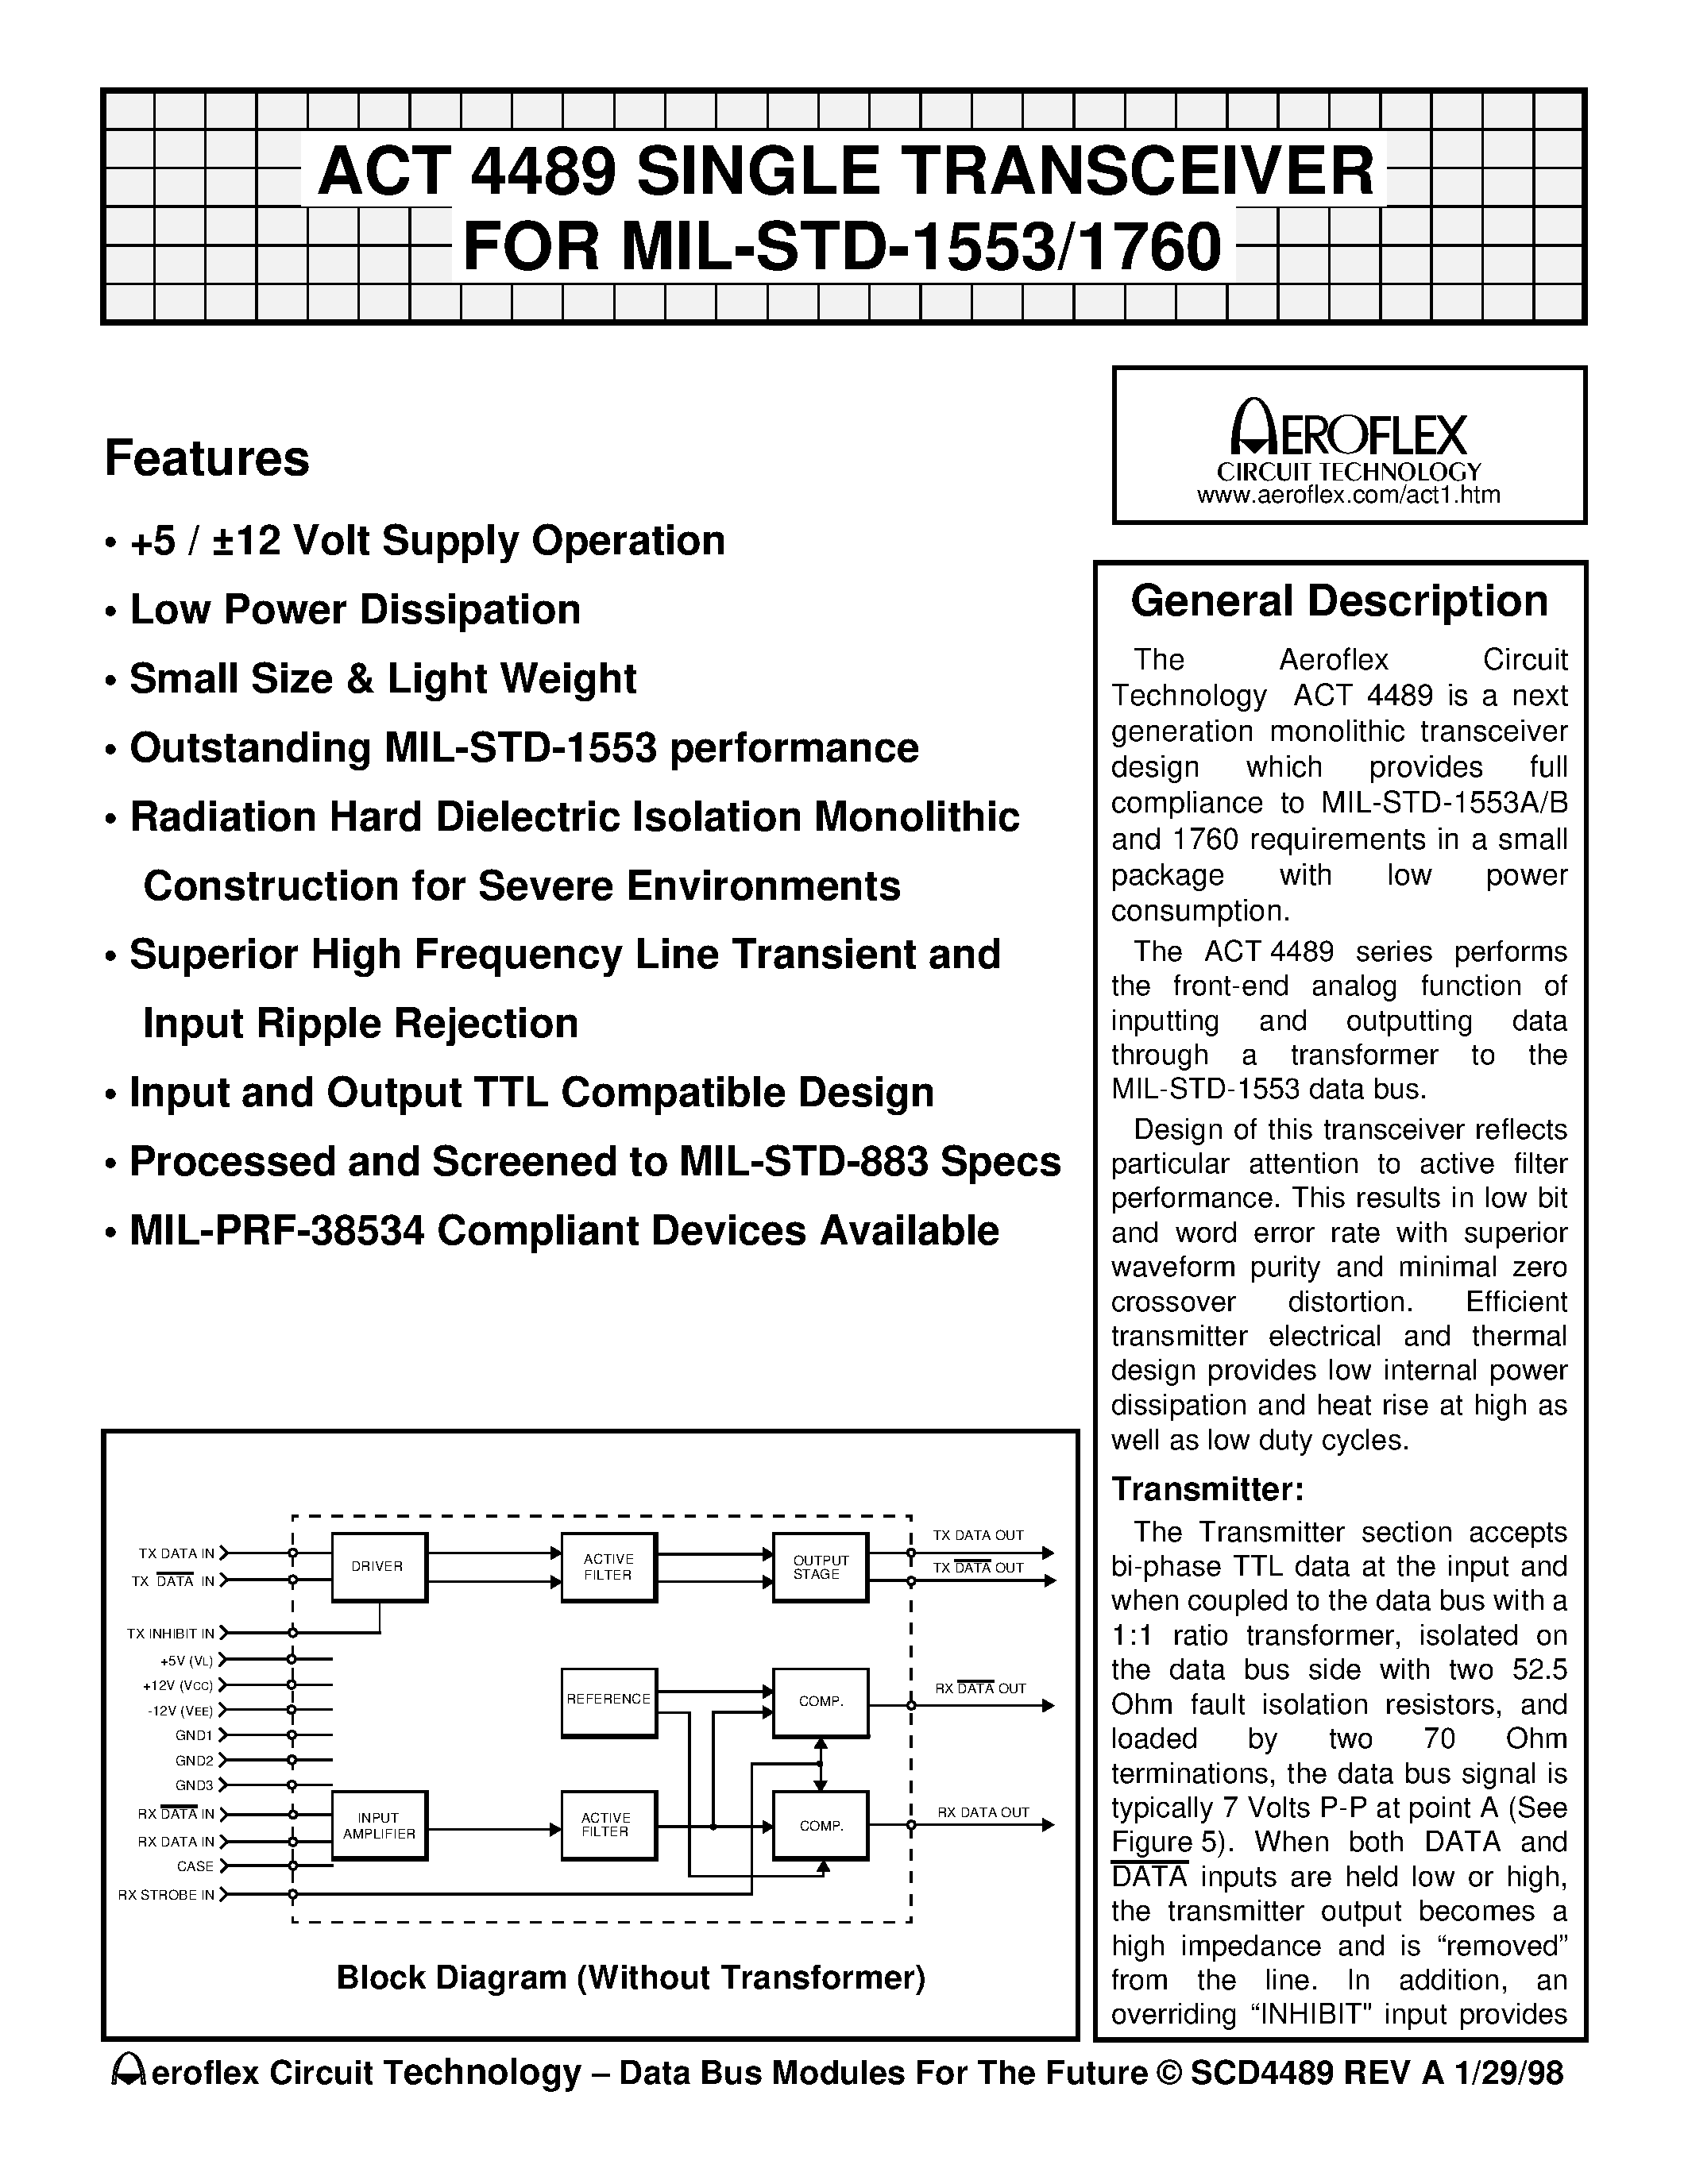 Datasheet ACT4489 - ACT 4489 SINGLE TRANSCEIVER FOR MIL-STD-1553/1760 page 1